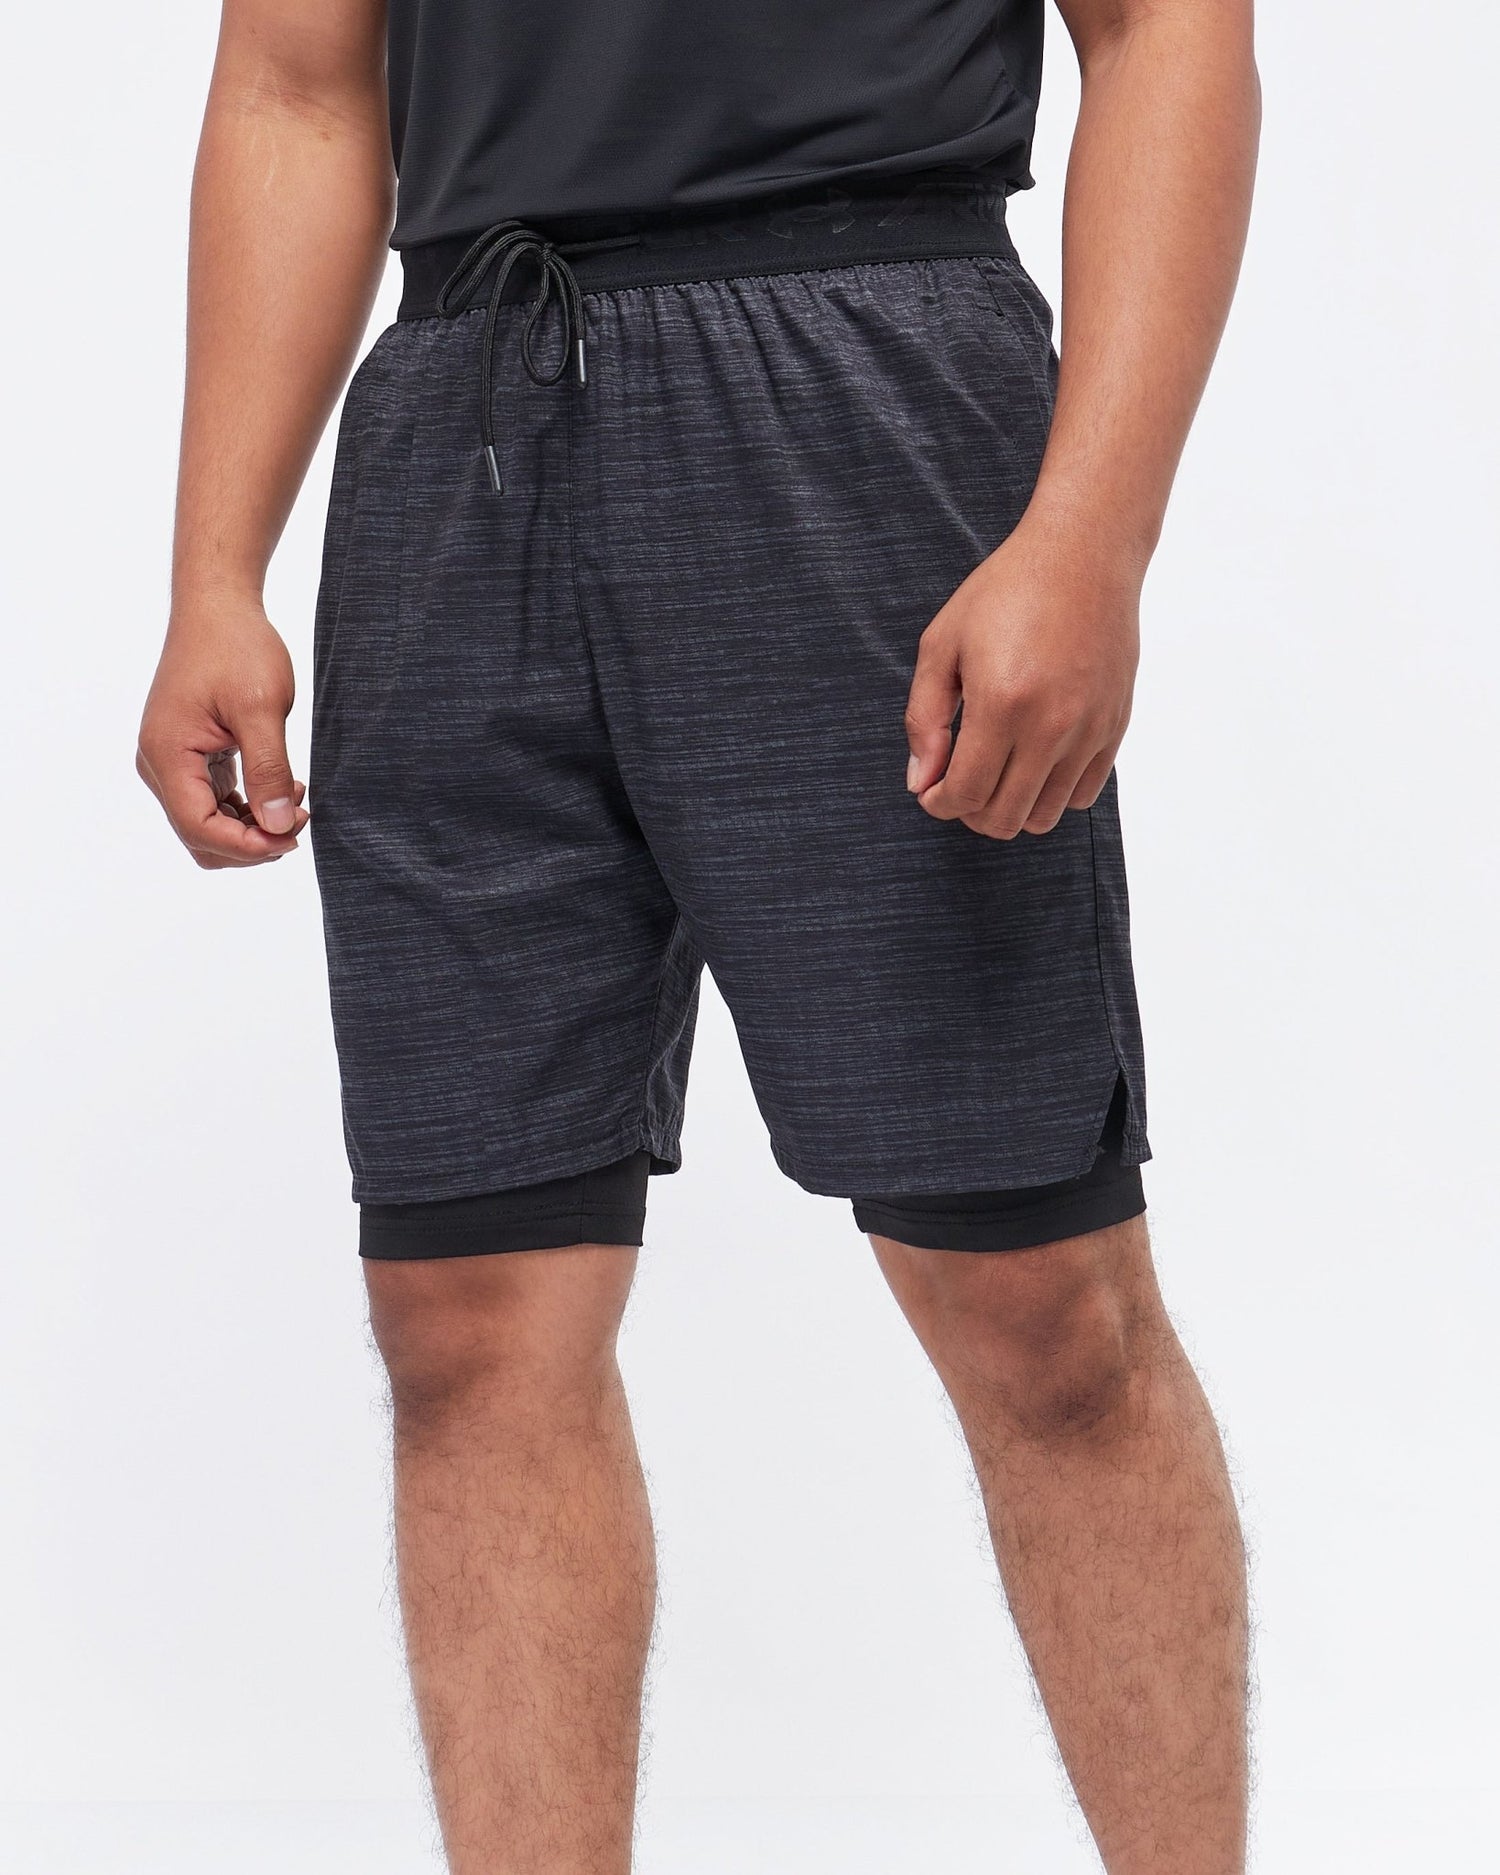 MOI OUTFIT-UA Stripes Over Printed 2 in 1 Men Sport Shorts 14.90